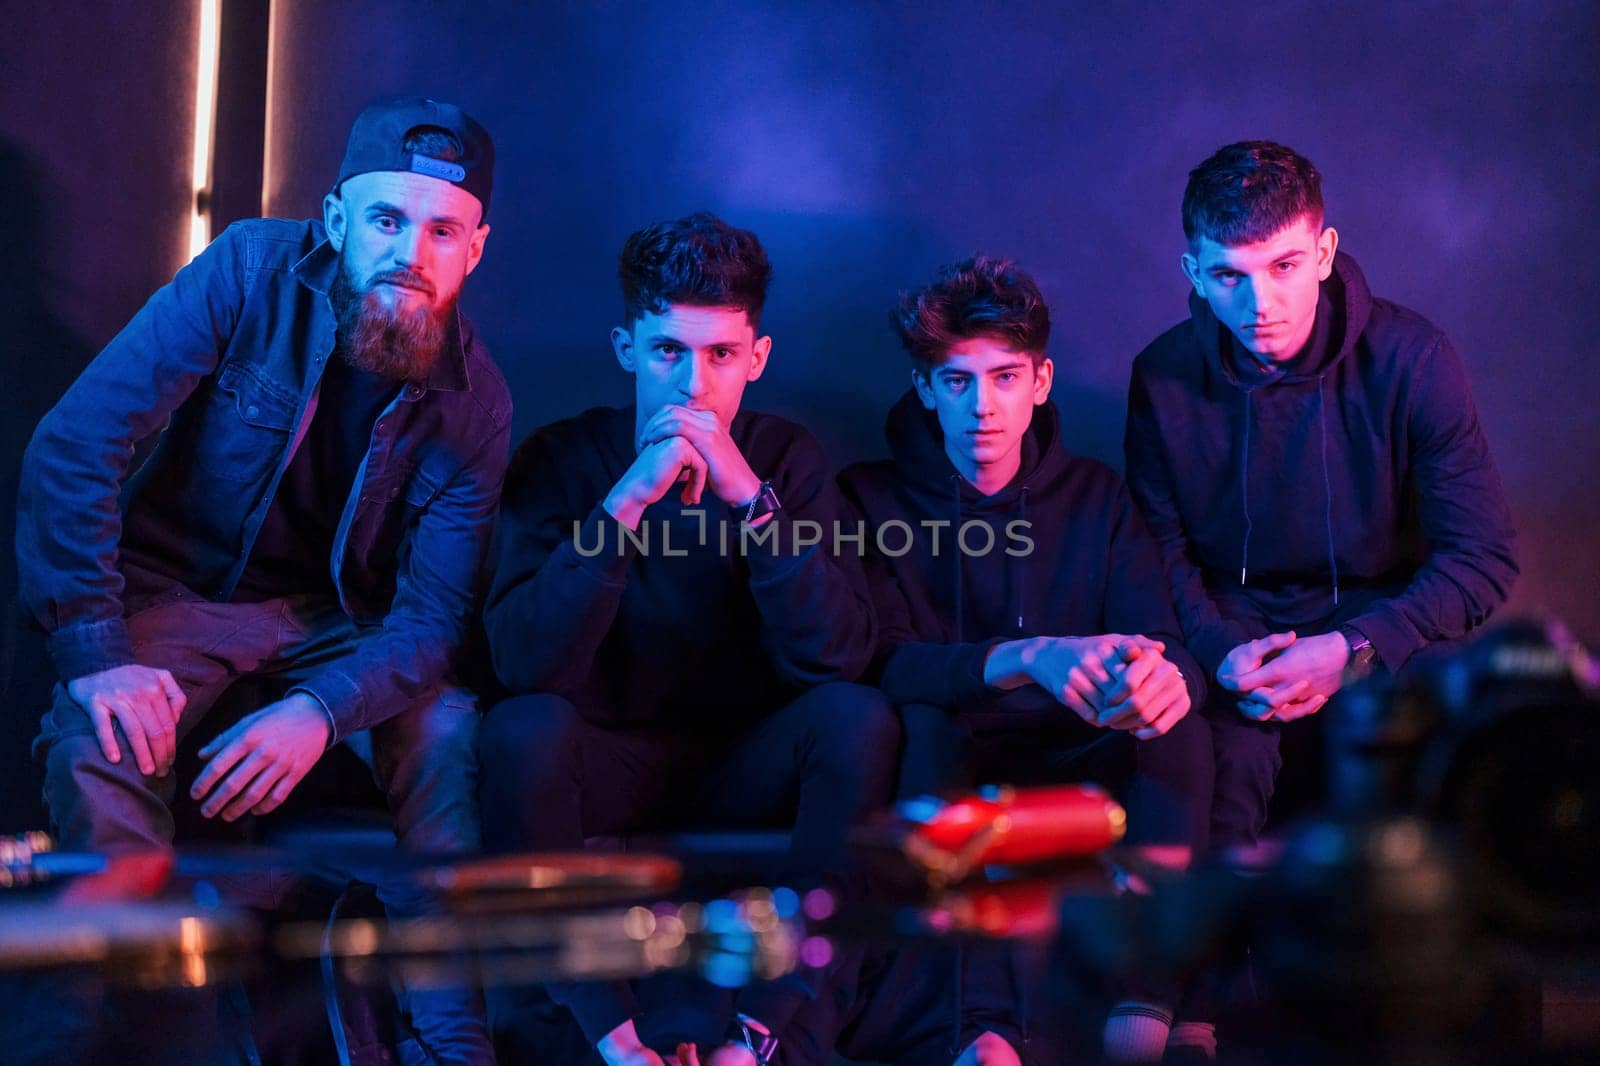 Group of people is together in the studio with futuristic neon lighting.